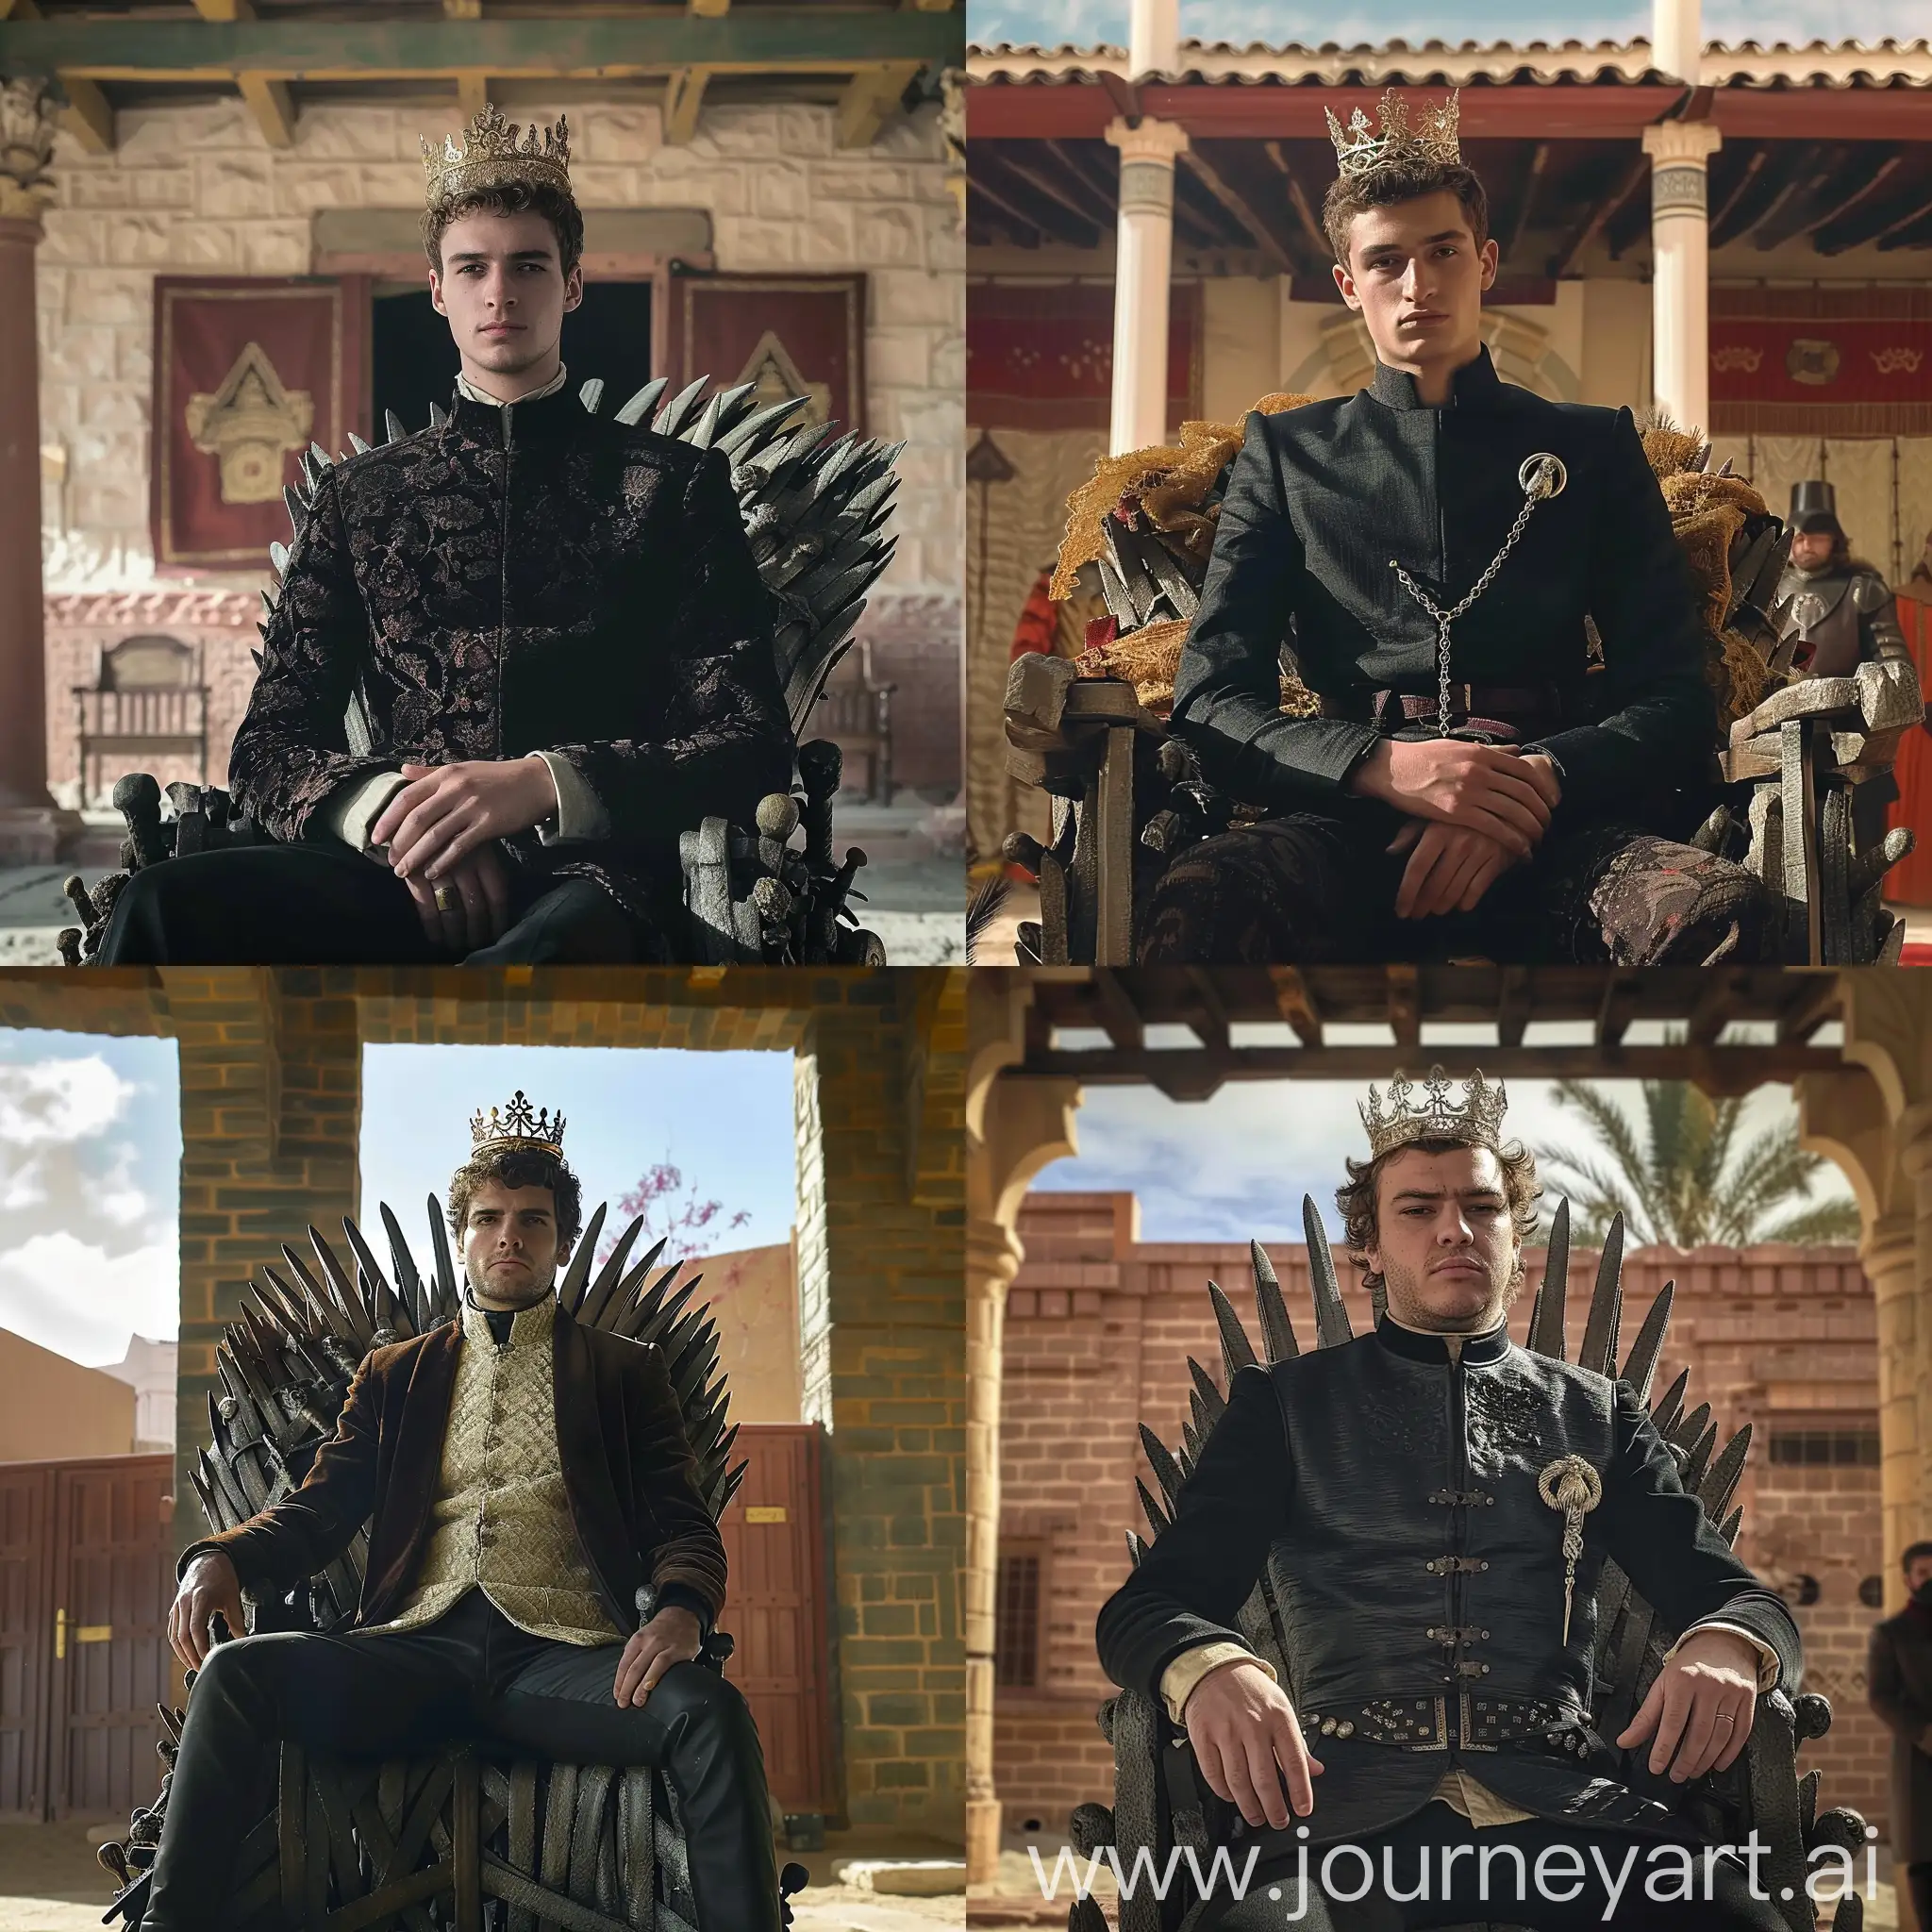 Regal-Ruler-on-Thrones-Majestic-Sovereign-in-Crown-Seated-on-Royal-Throne